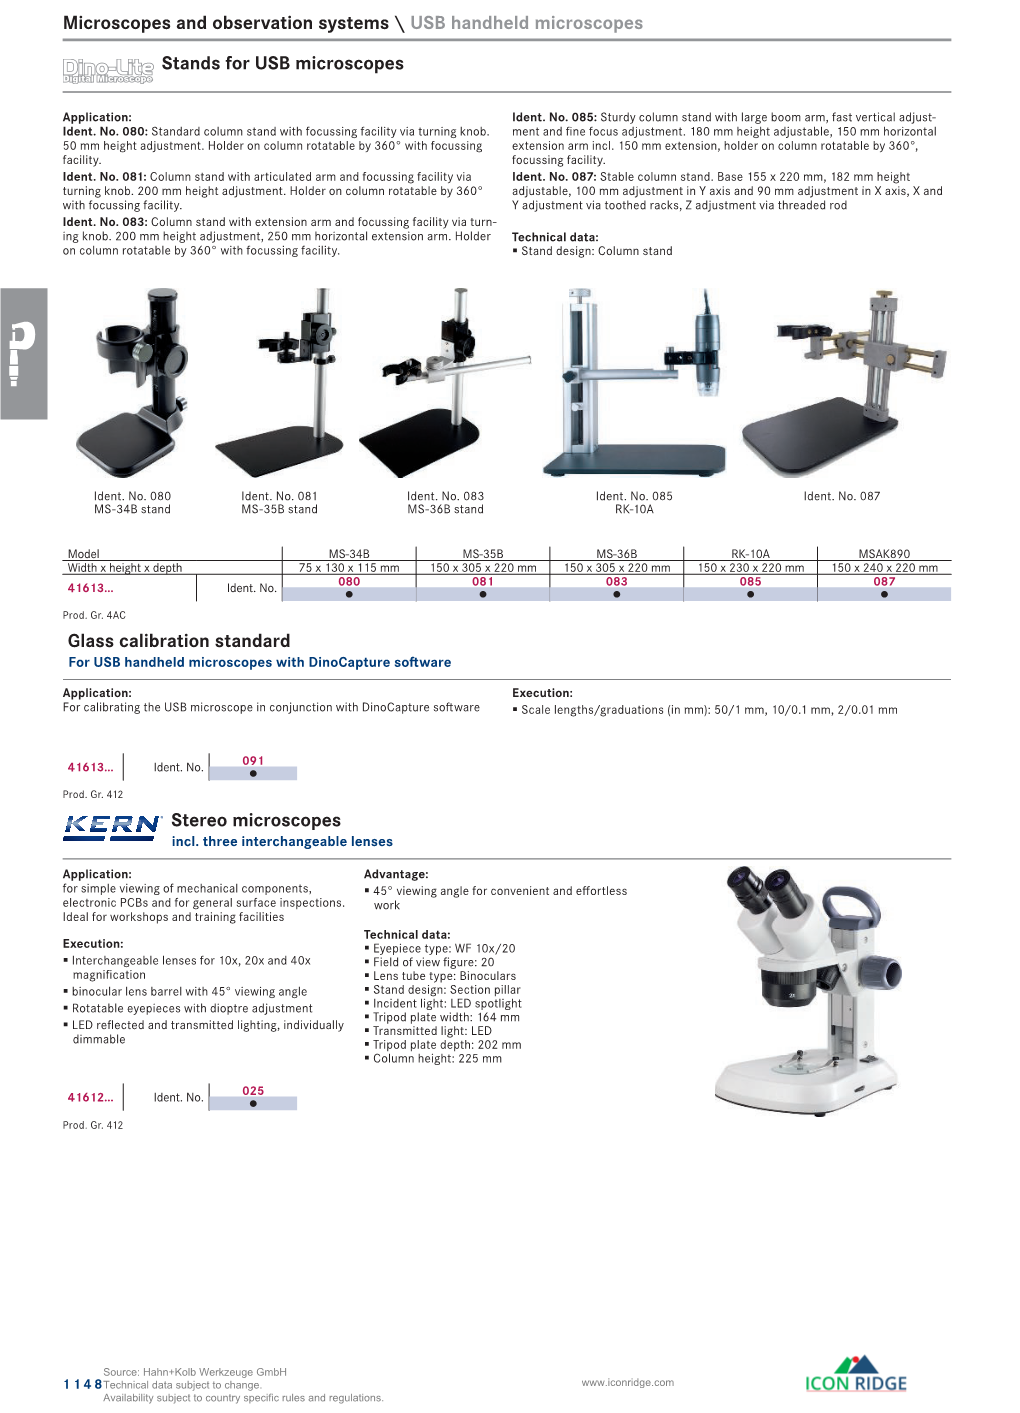 Microscopes and Observation Systems \ USB Handheld Microscopes